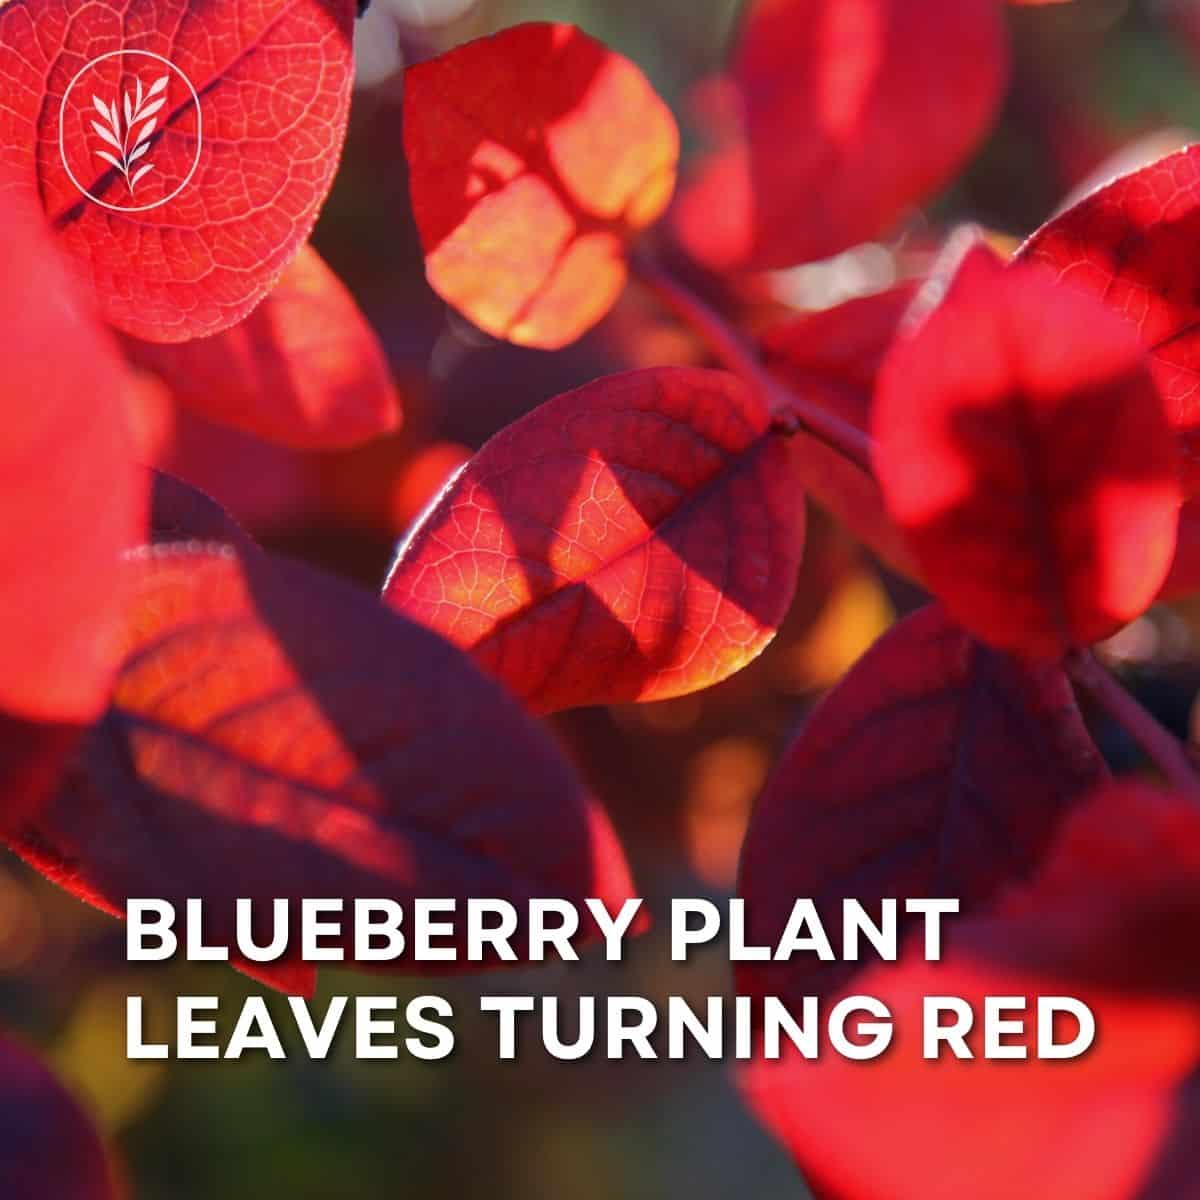 Blueberry plant leaves turning red via @home4theharvest